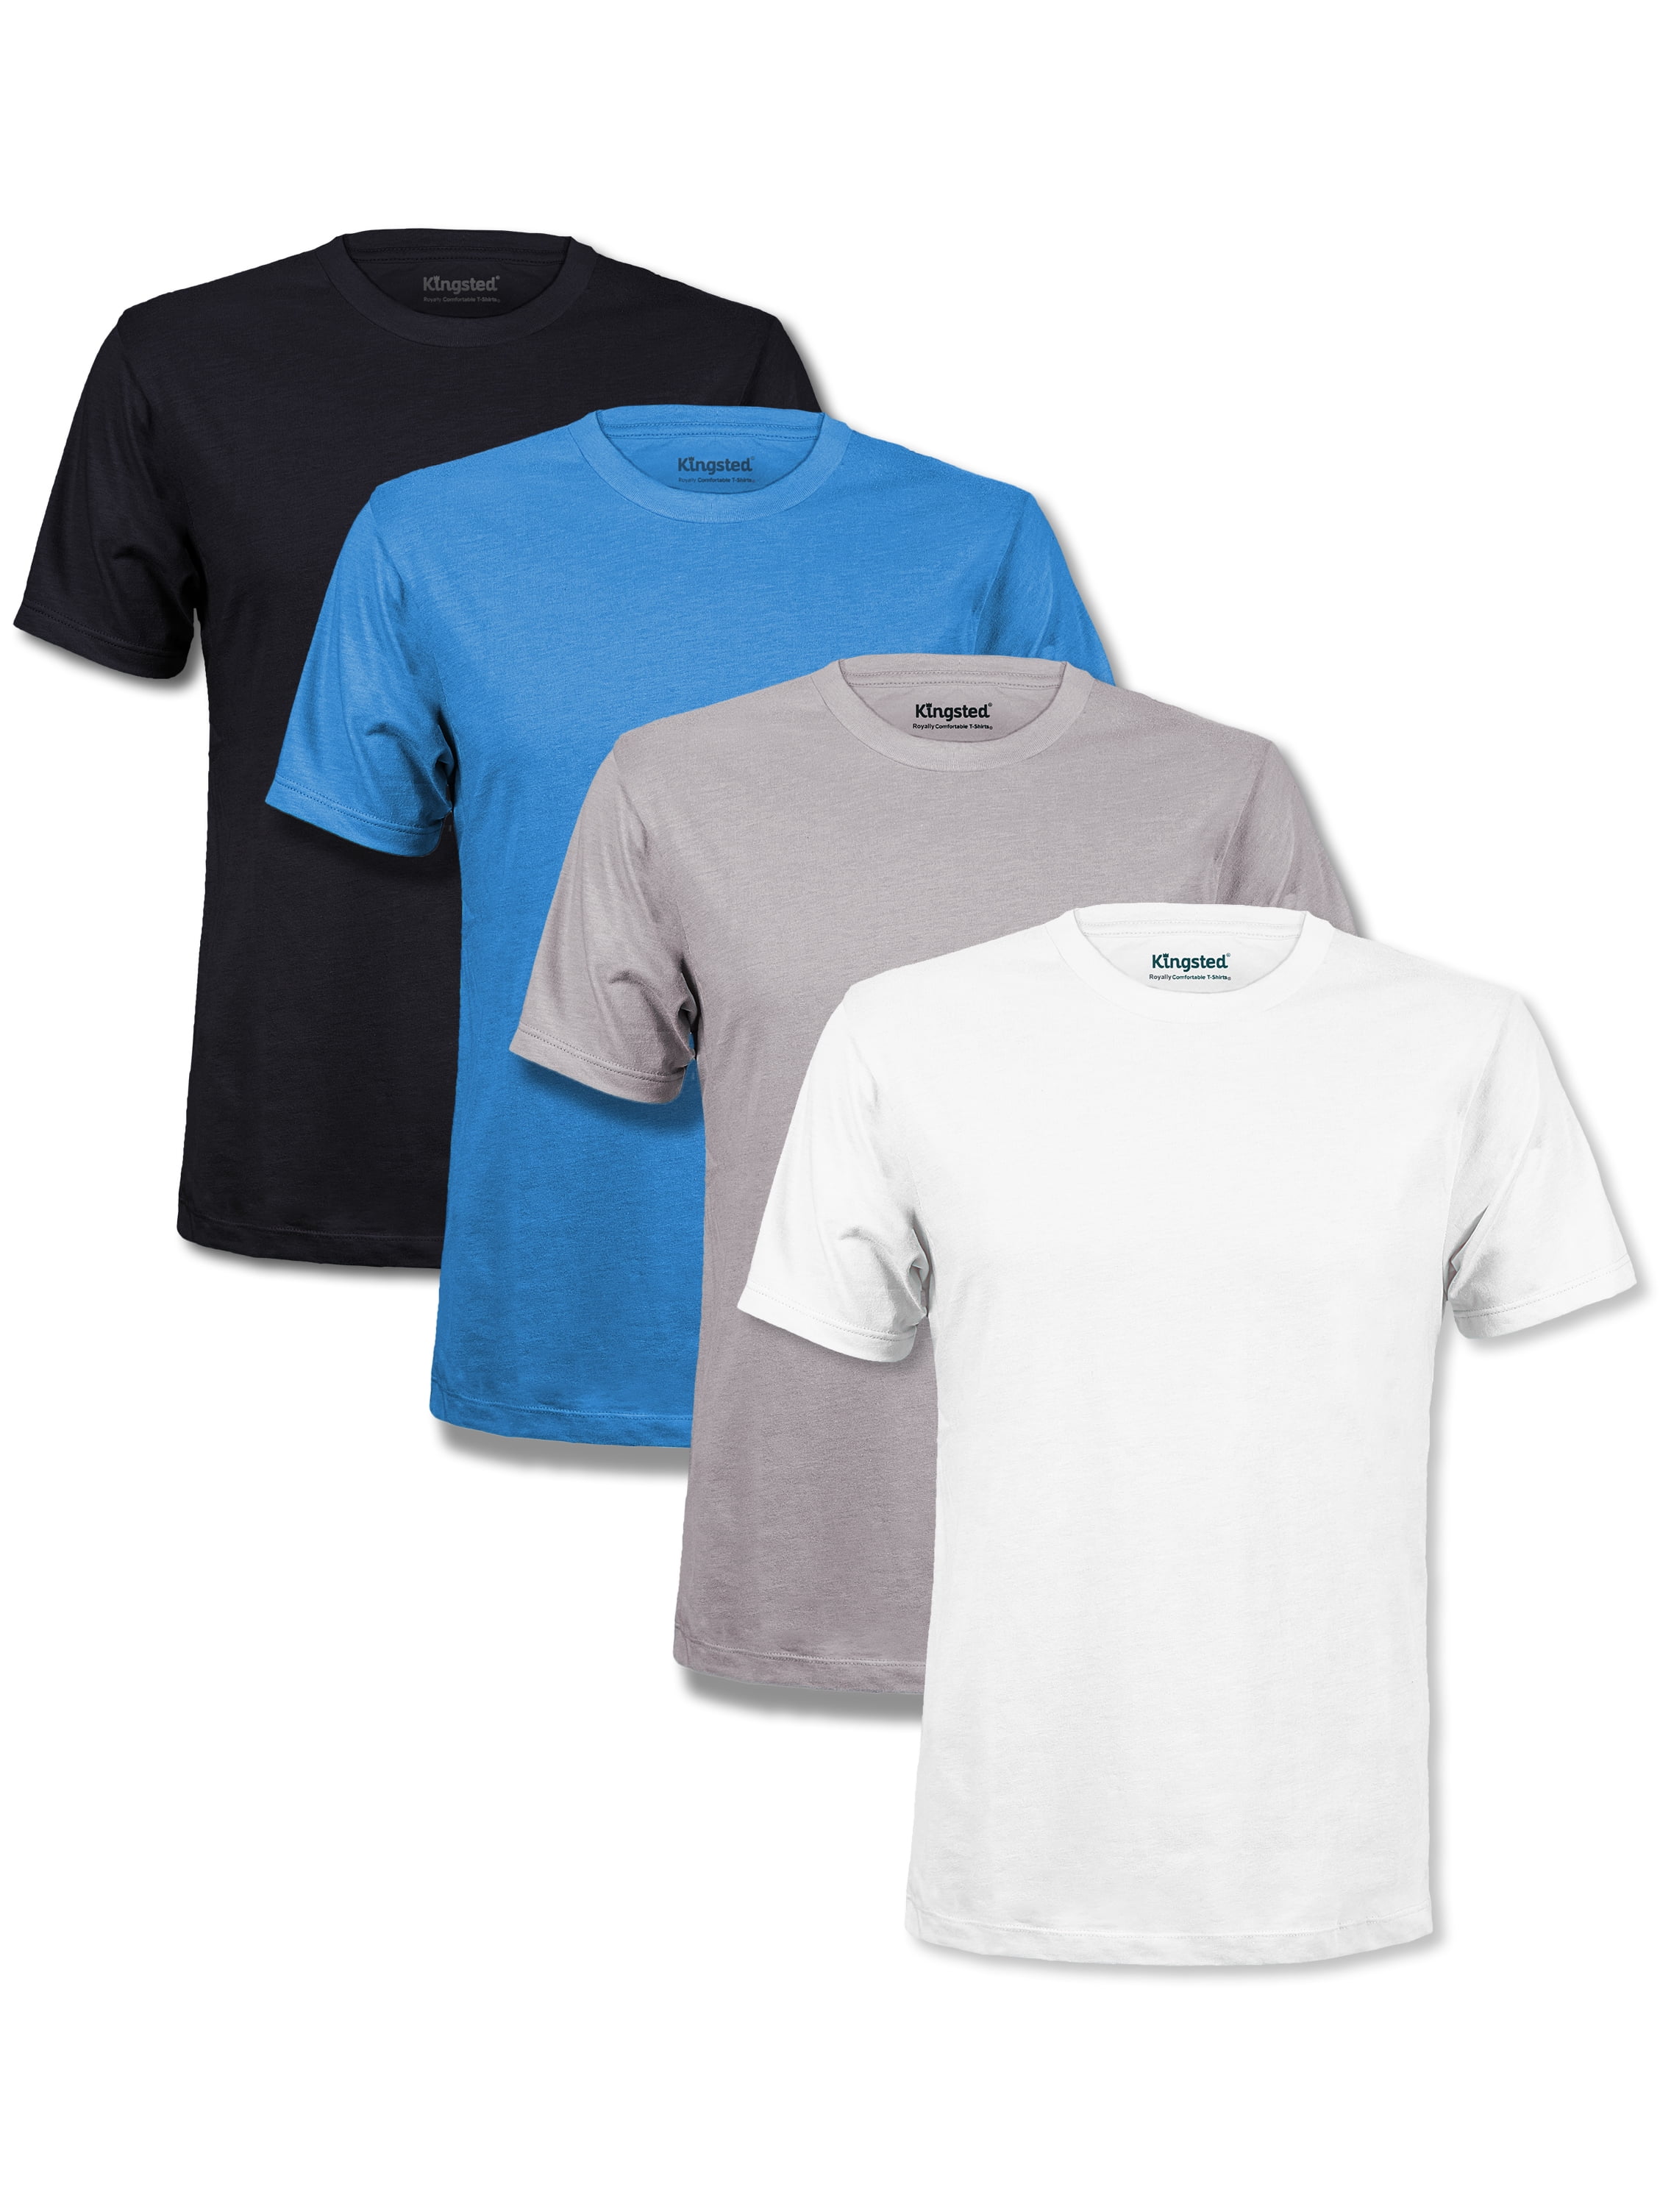 Kingsted Black T-Shirts for Men - Royally Comfortable - Super Soft Premium  Cotton Blend - Short Sleeve Tagless Crewneck - Well-Crafted True Classic  Tees (3 Pack Black, Small)